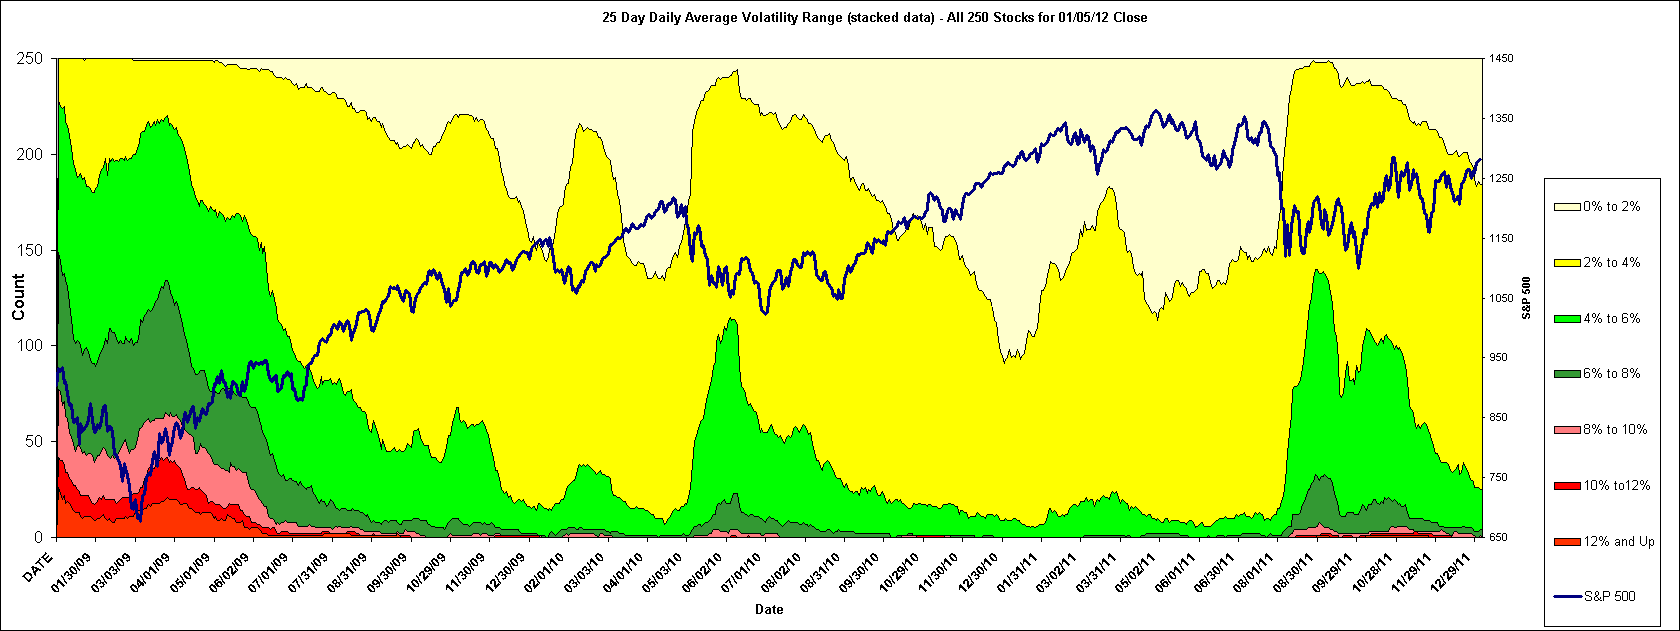 25 Day Daily Average Volatility Range (stacked data) - All 250 Stocks for 01/05/12 Close